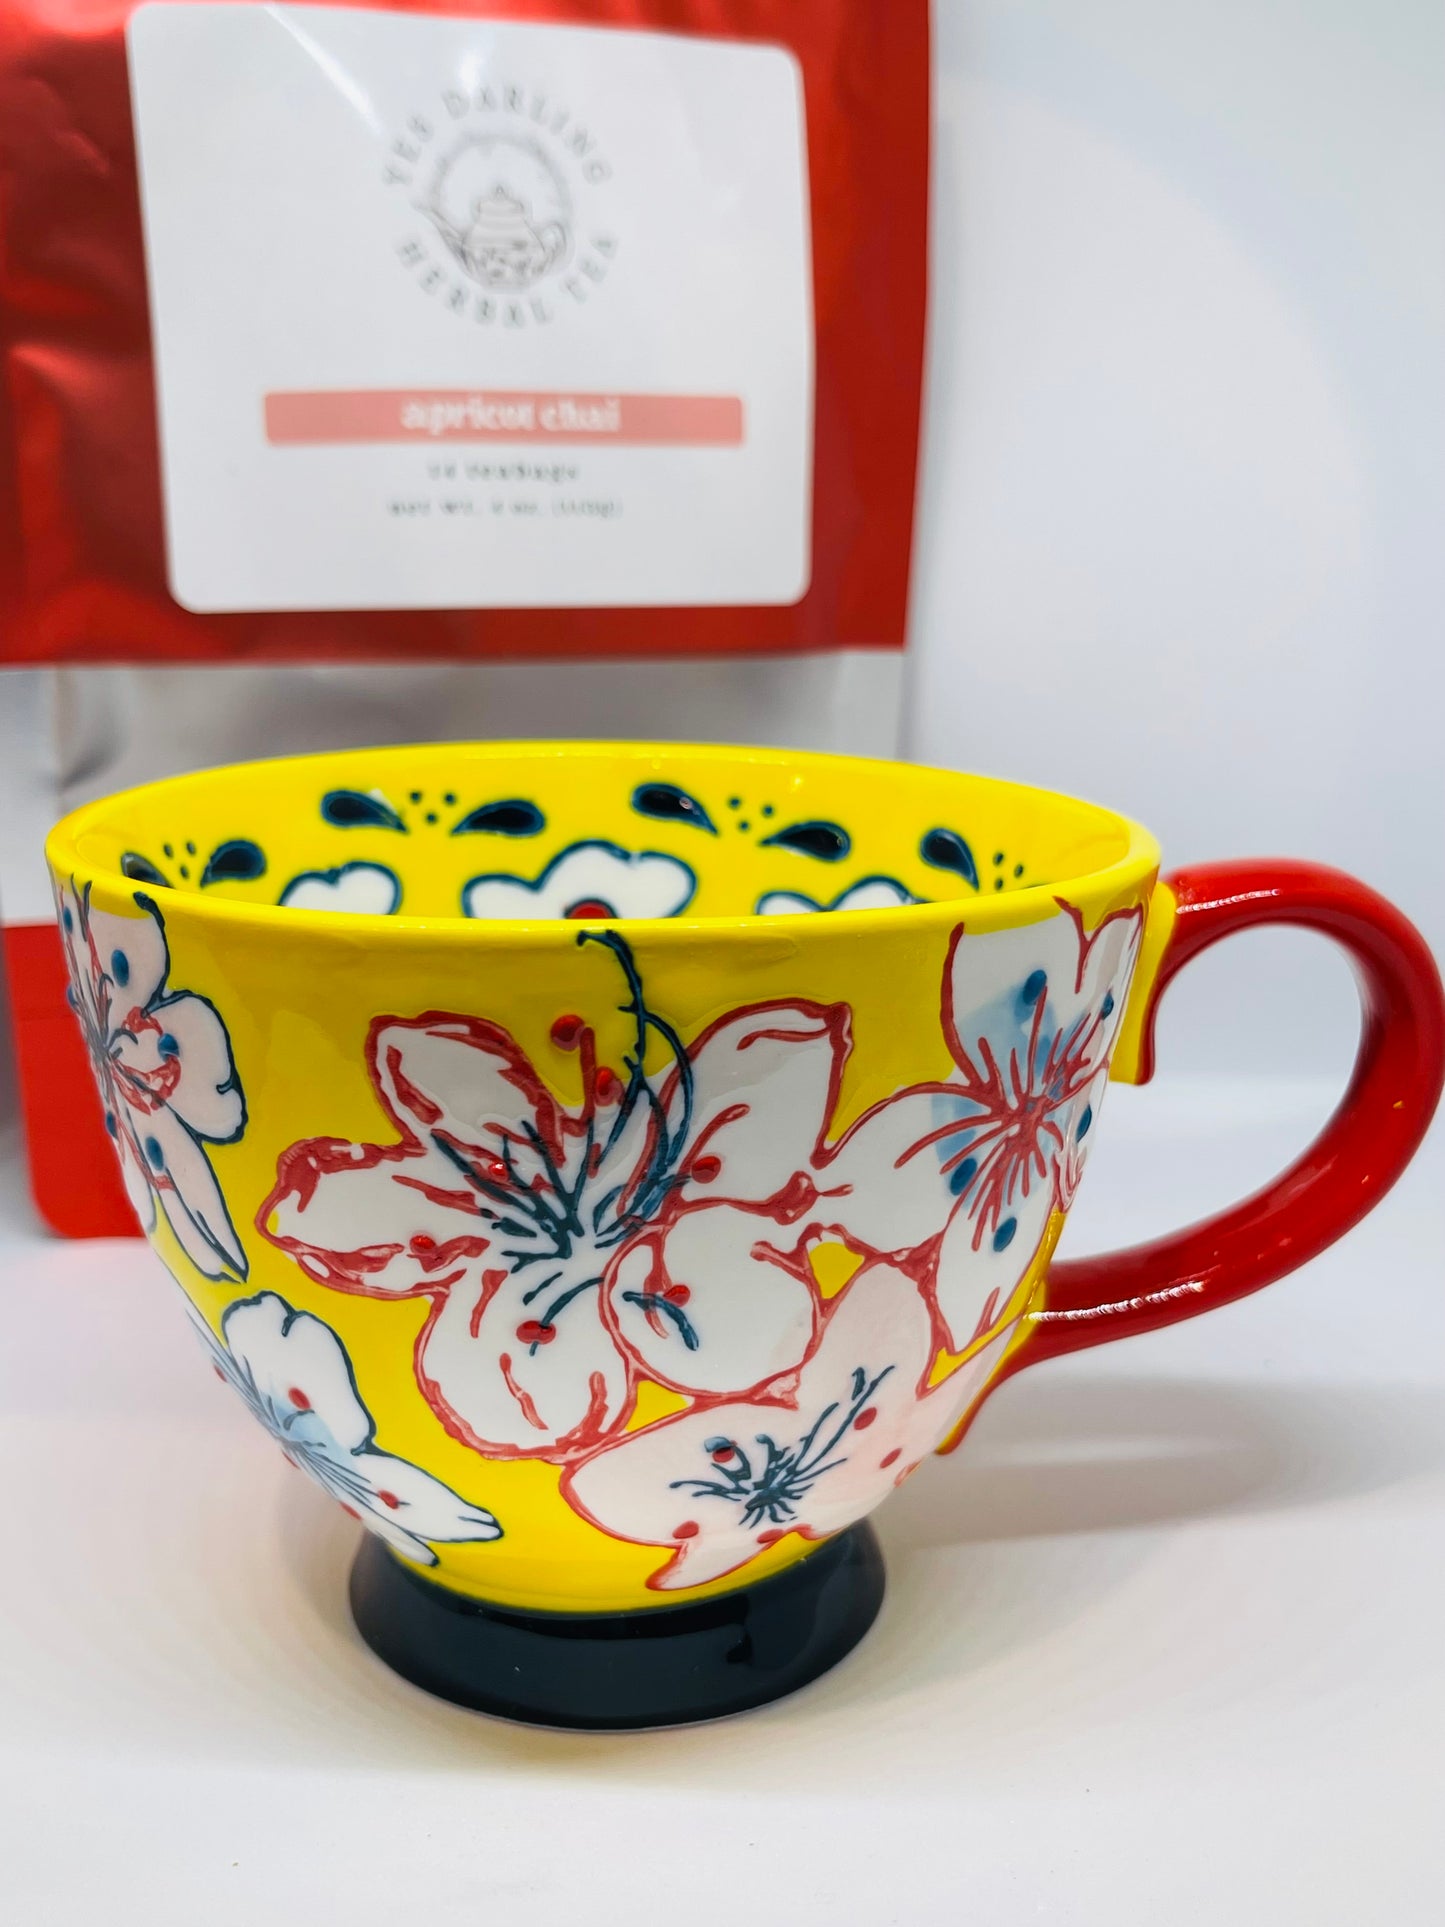 A yellow tea mug with red and navy blue trimmed white flowers with pink and blue spots and red and navy blue dots, a red handle, and a navy blue base.